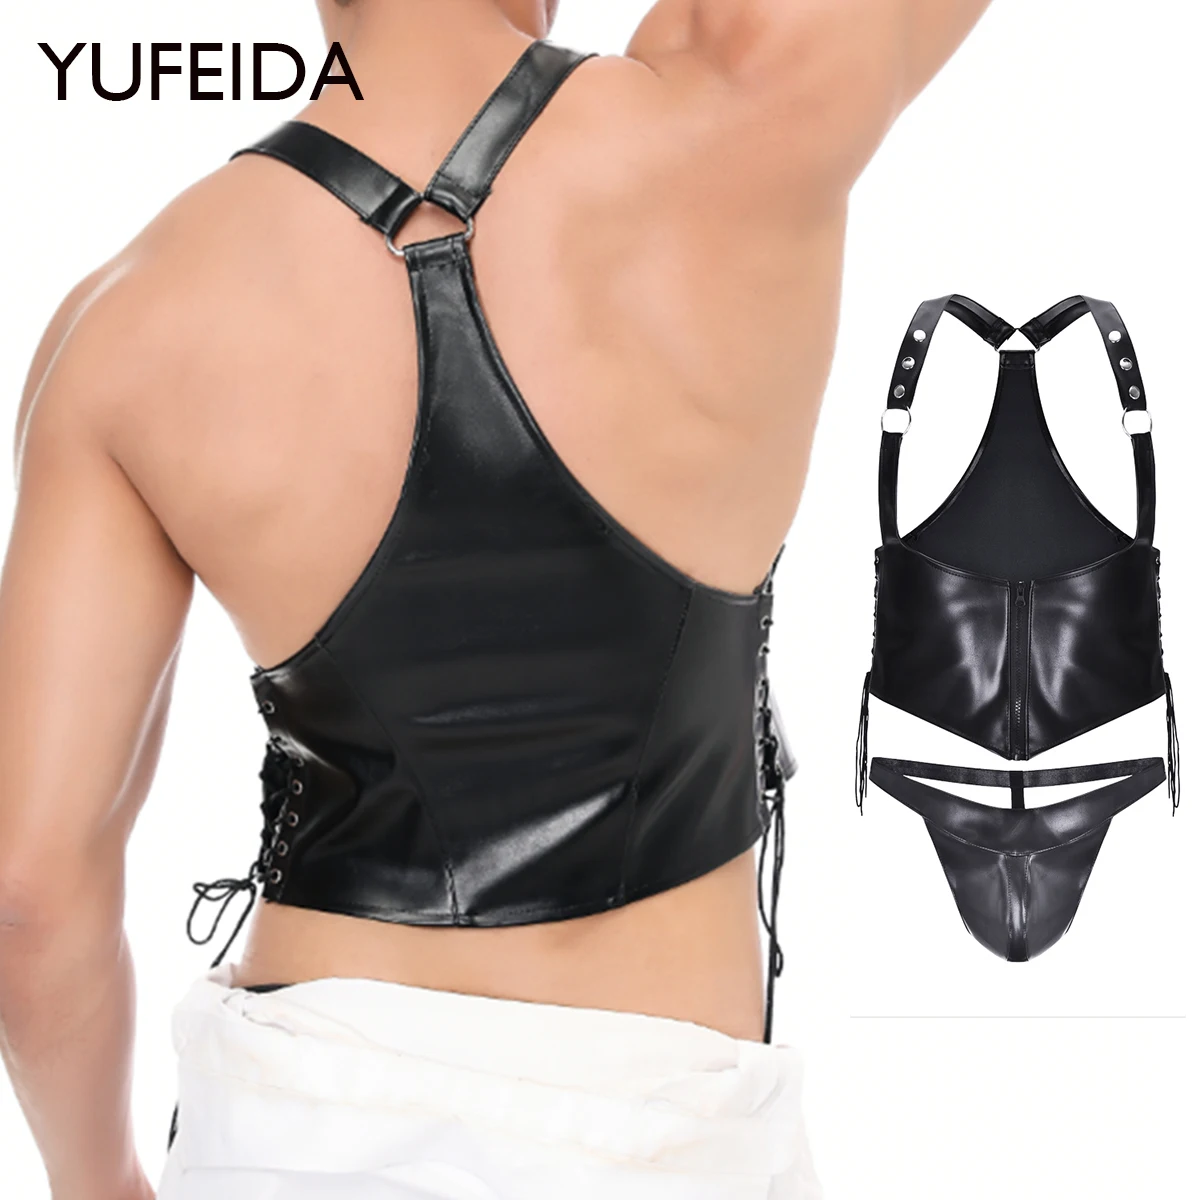 

YUFEIDA Sexy Mens PU Leather Strappy Vest Panty Sets Gay Sissy Fetish Catsuit Bodysuit Lingerie Exotic Party Nightclubs Costume